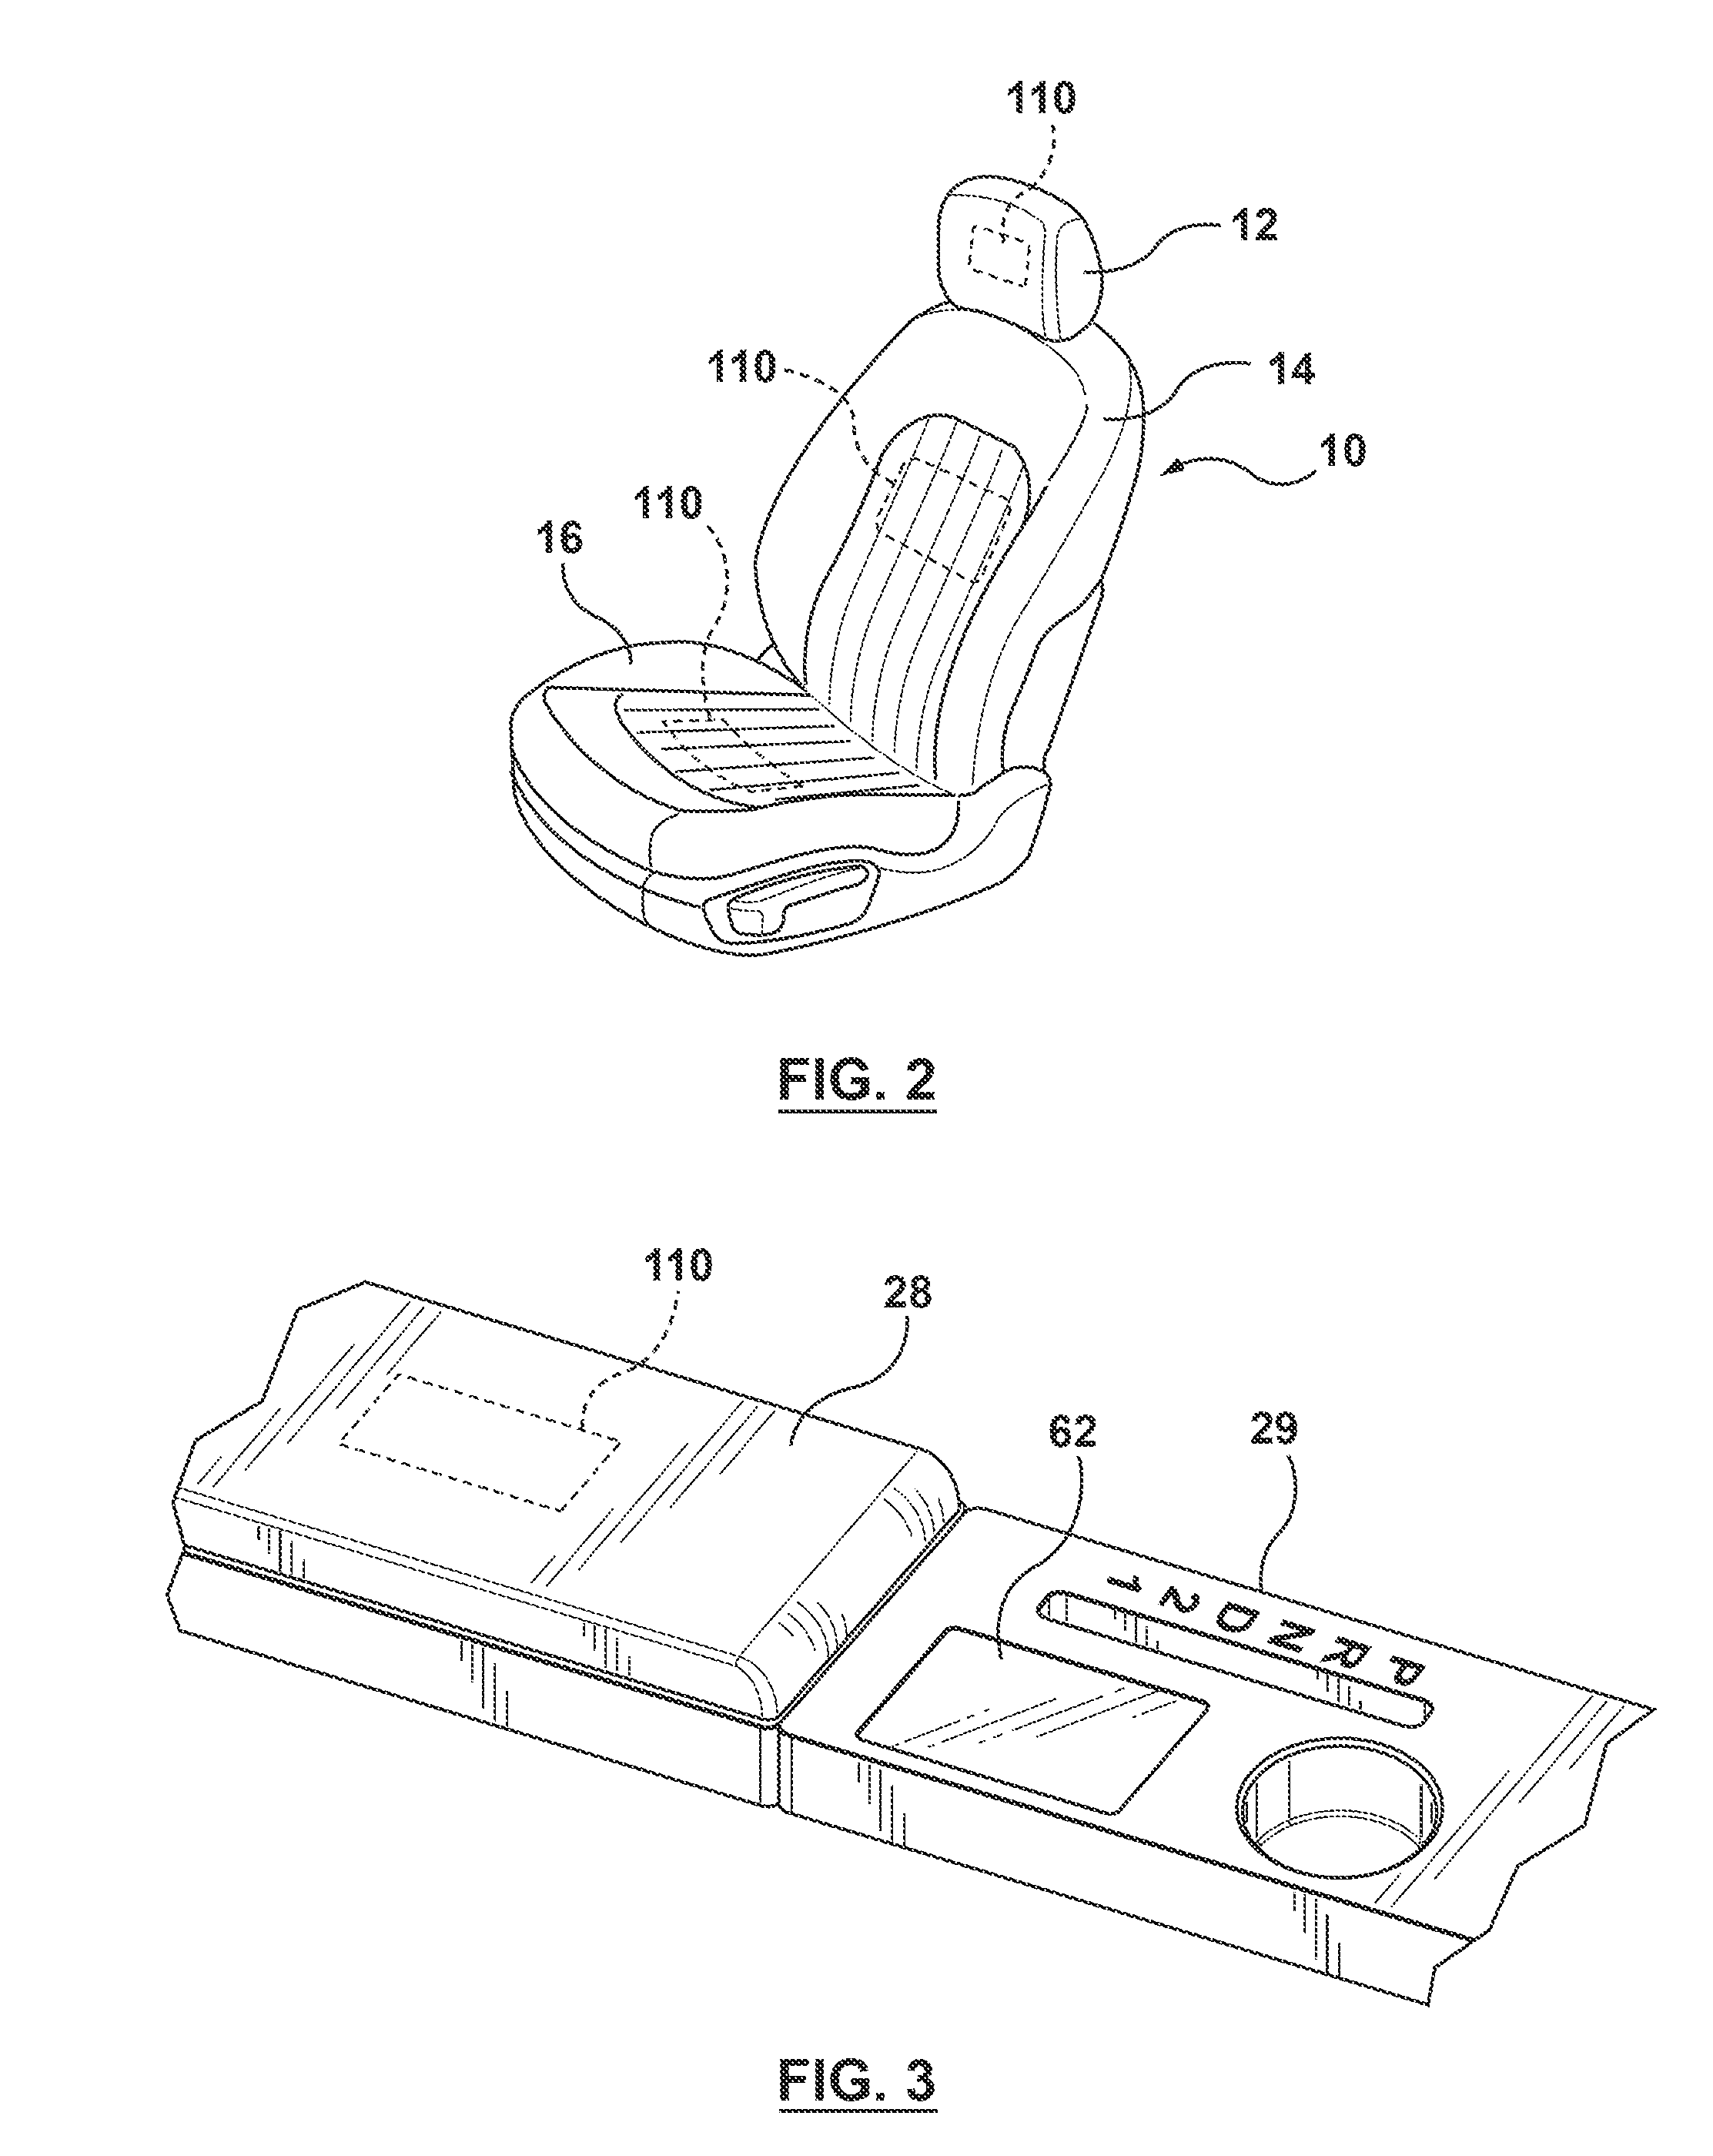 Gesture based input system in a vehicle with haptic feedback